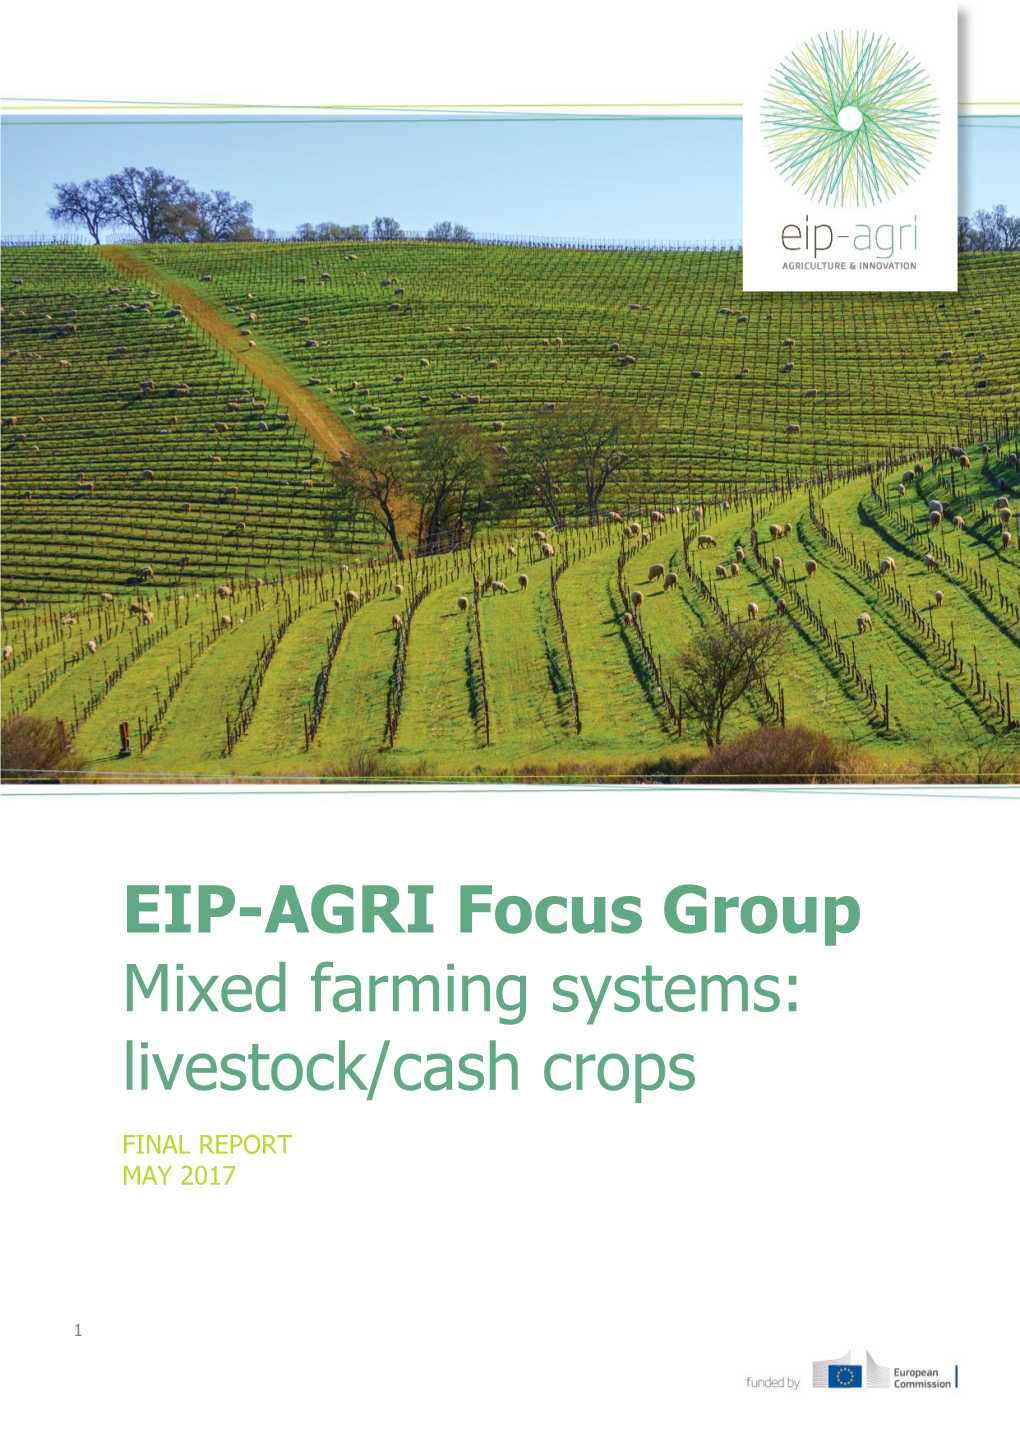 EIP-AGRI Focus Group Mixed Farming Systems: Livestock/Cash Crops